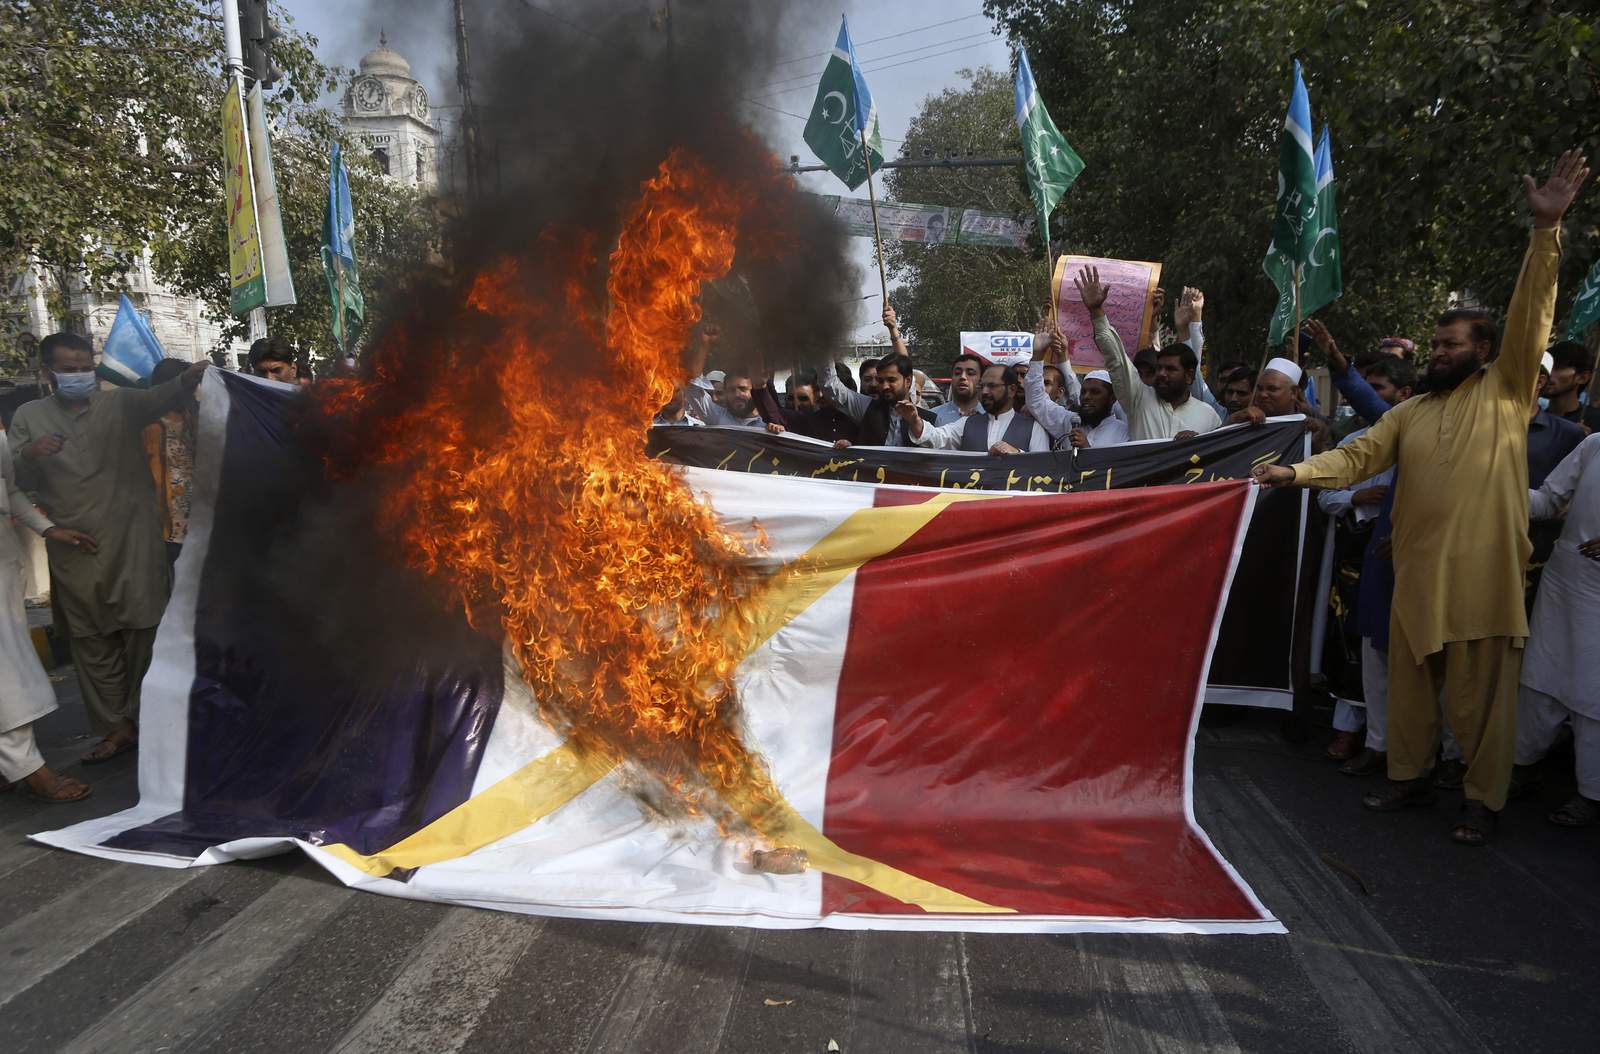 As anger rises, Muslims protest French cartoons